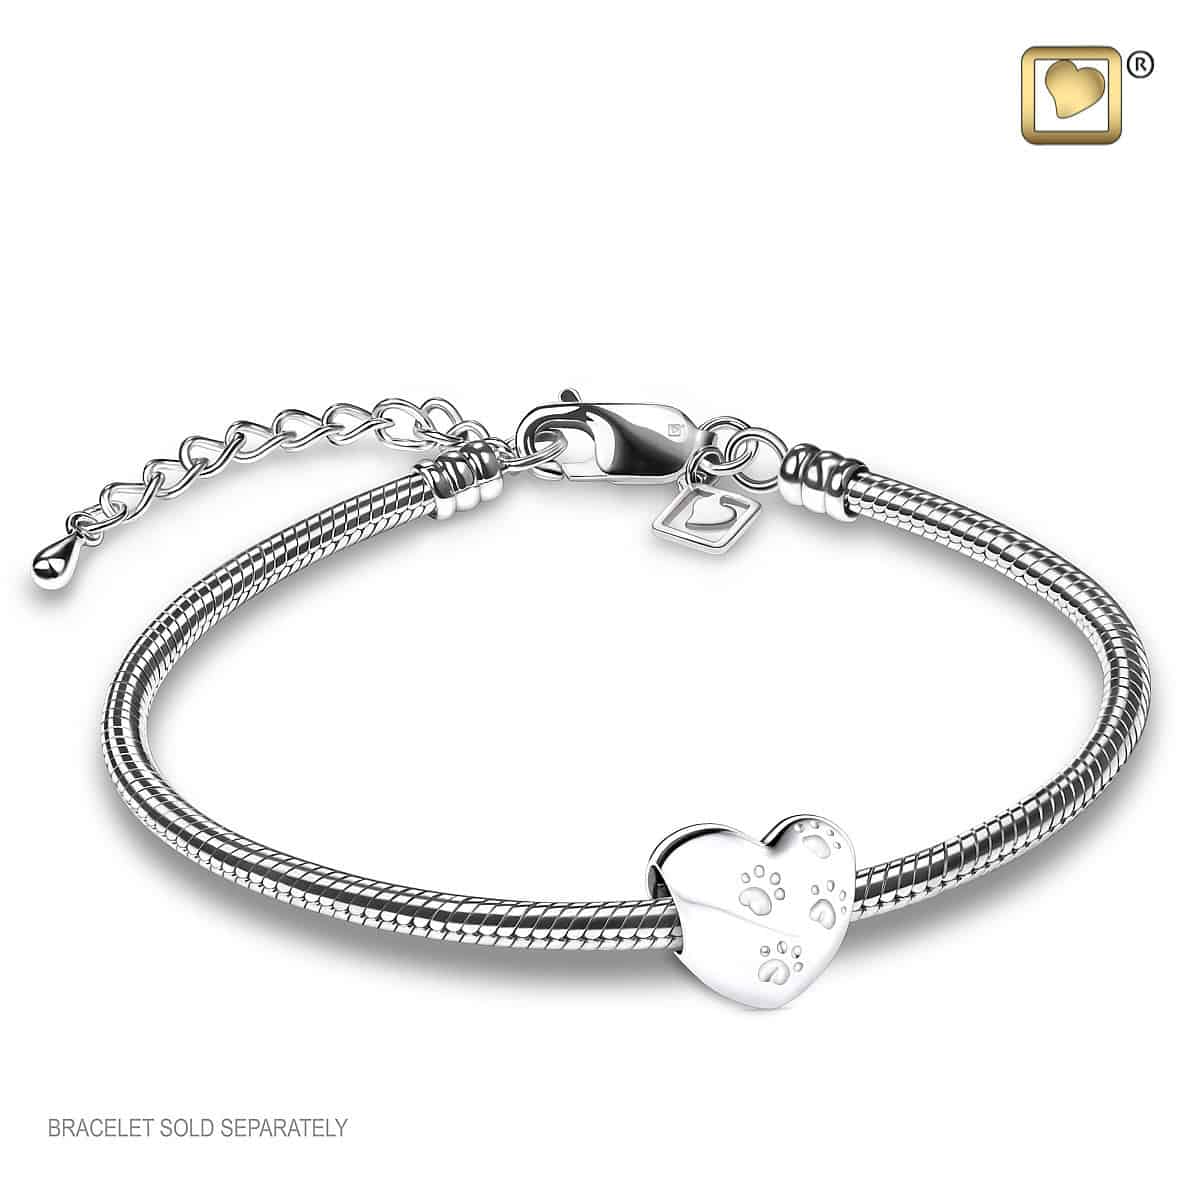 Ruannan 925 Sterling Silver Heart Dangle Charms For Bracelets Necklaces,  Mother and Daughter Engraving, Paw Prints On My Heart Split Charm Jewelry